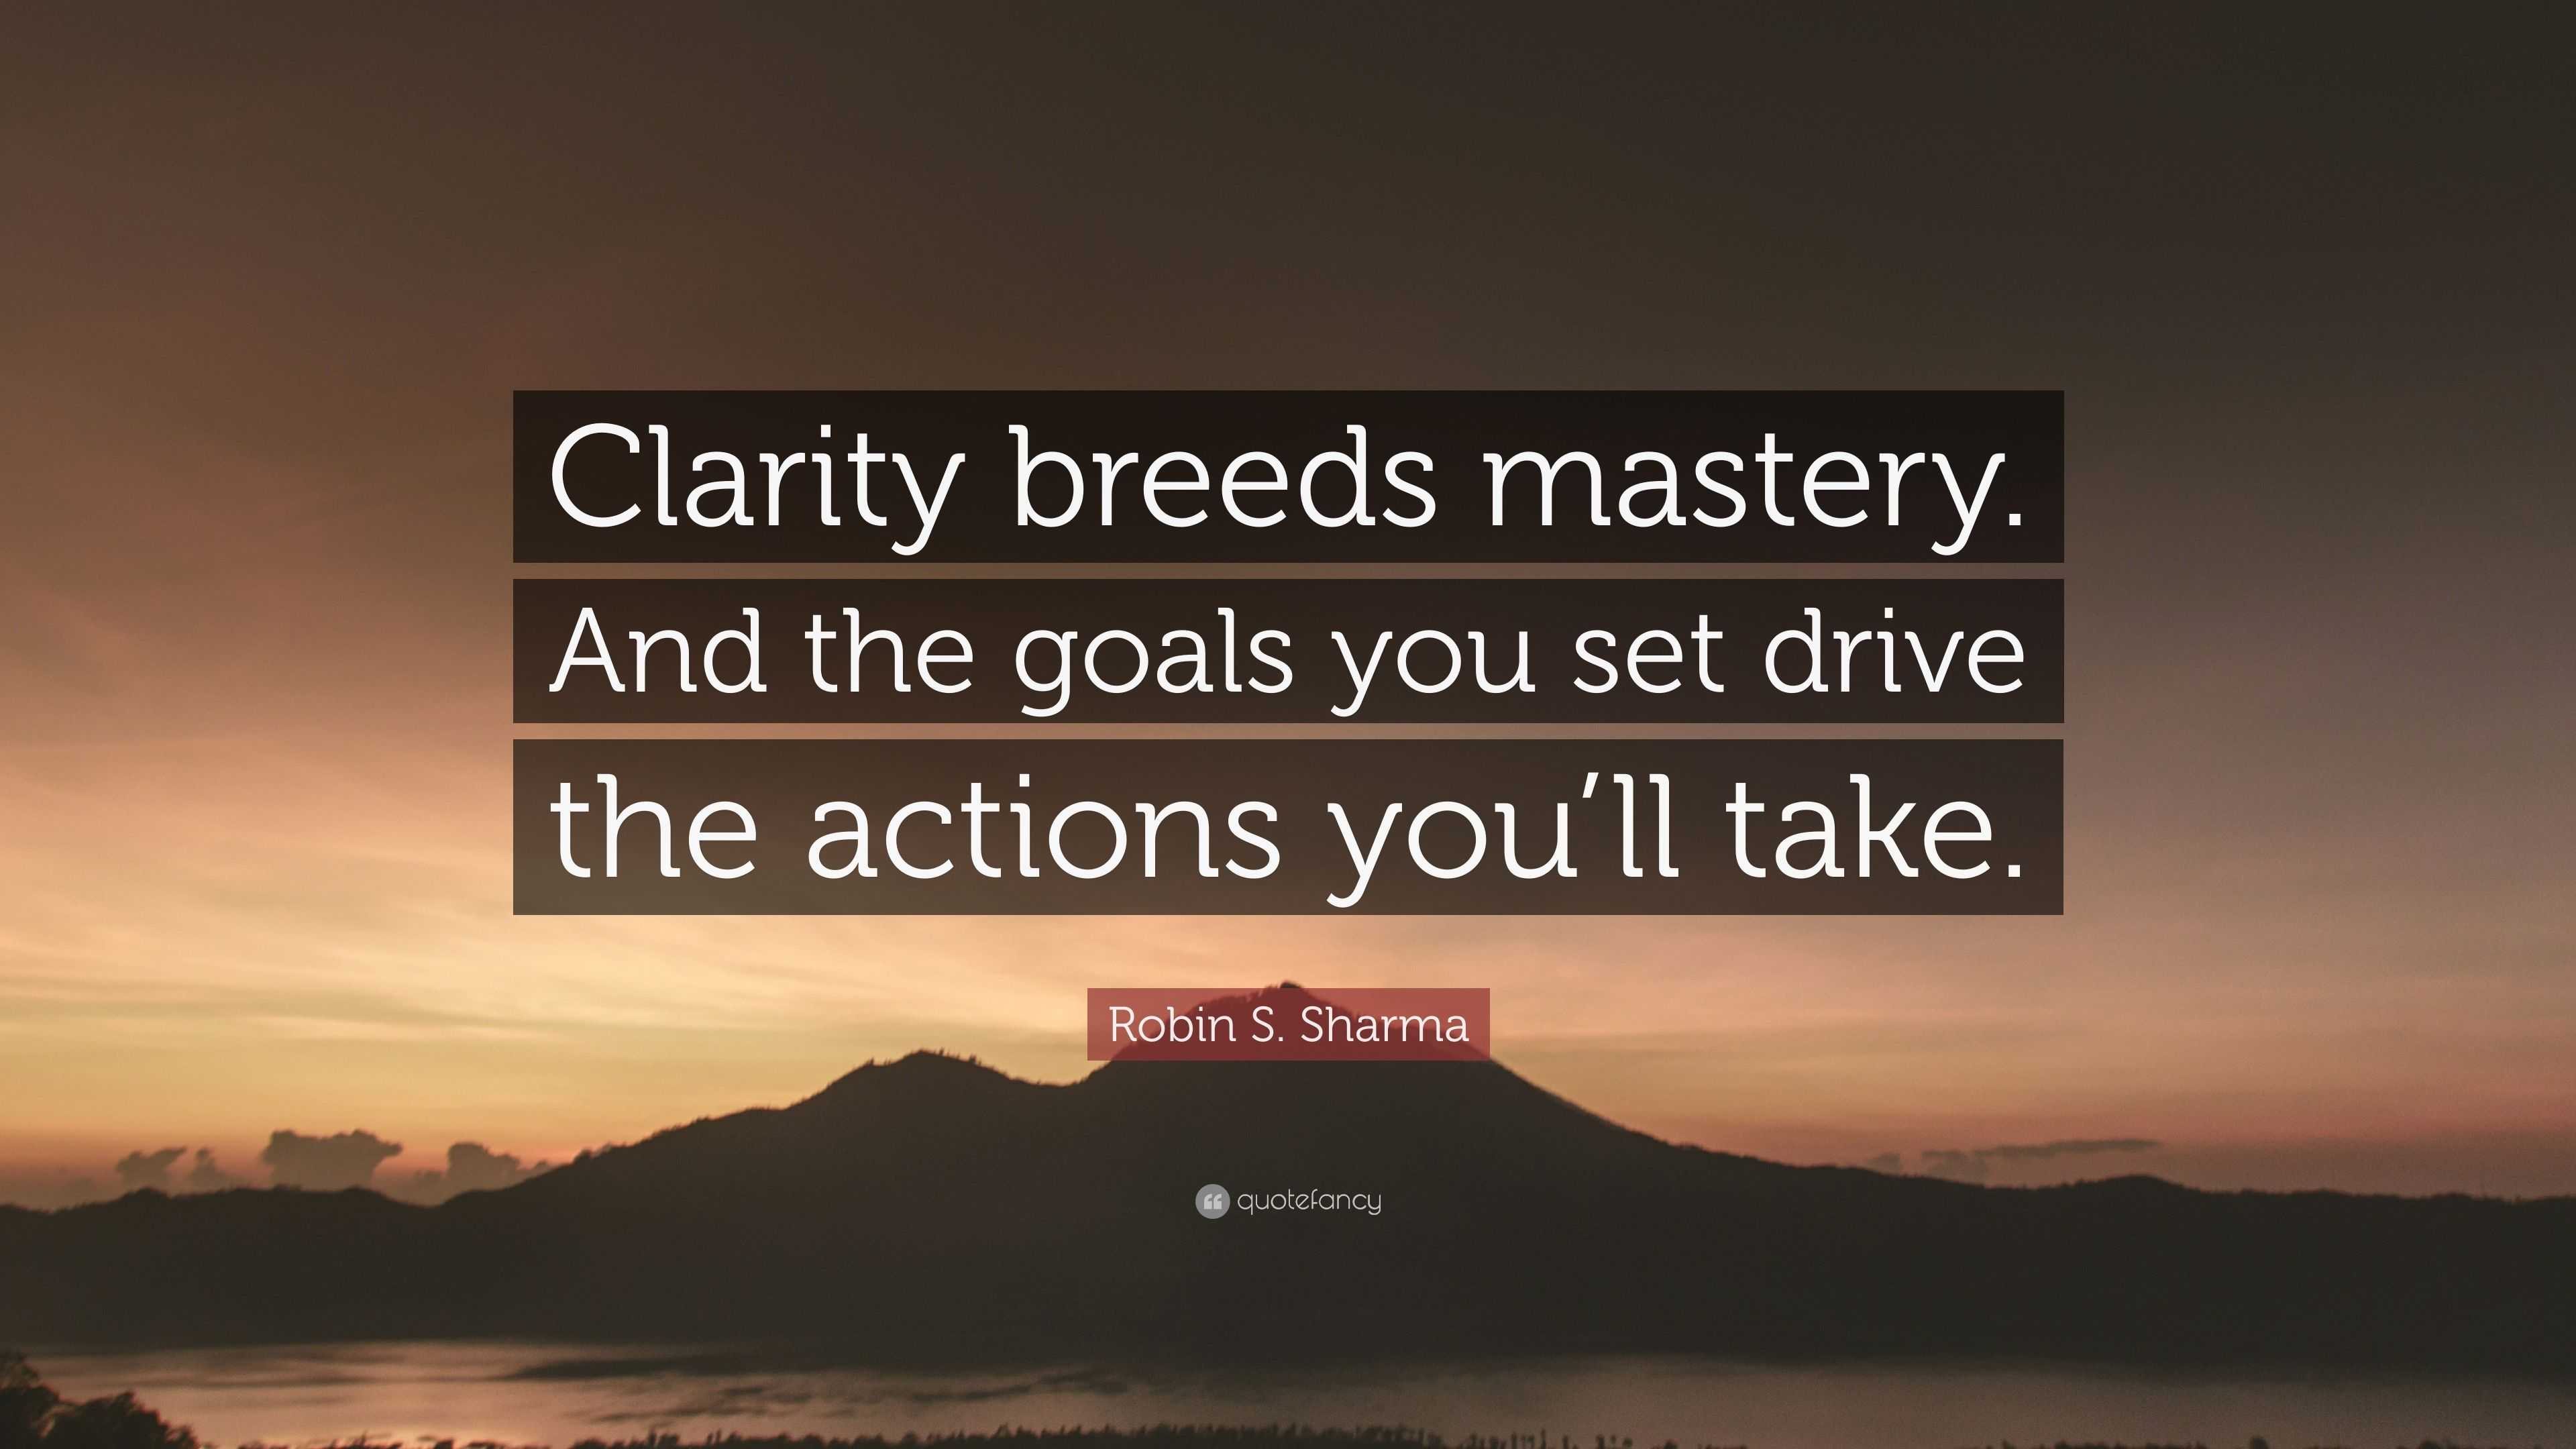 Robin S. Sharma Quote: “Clarity breeds mastery. And the goals you set